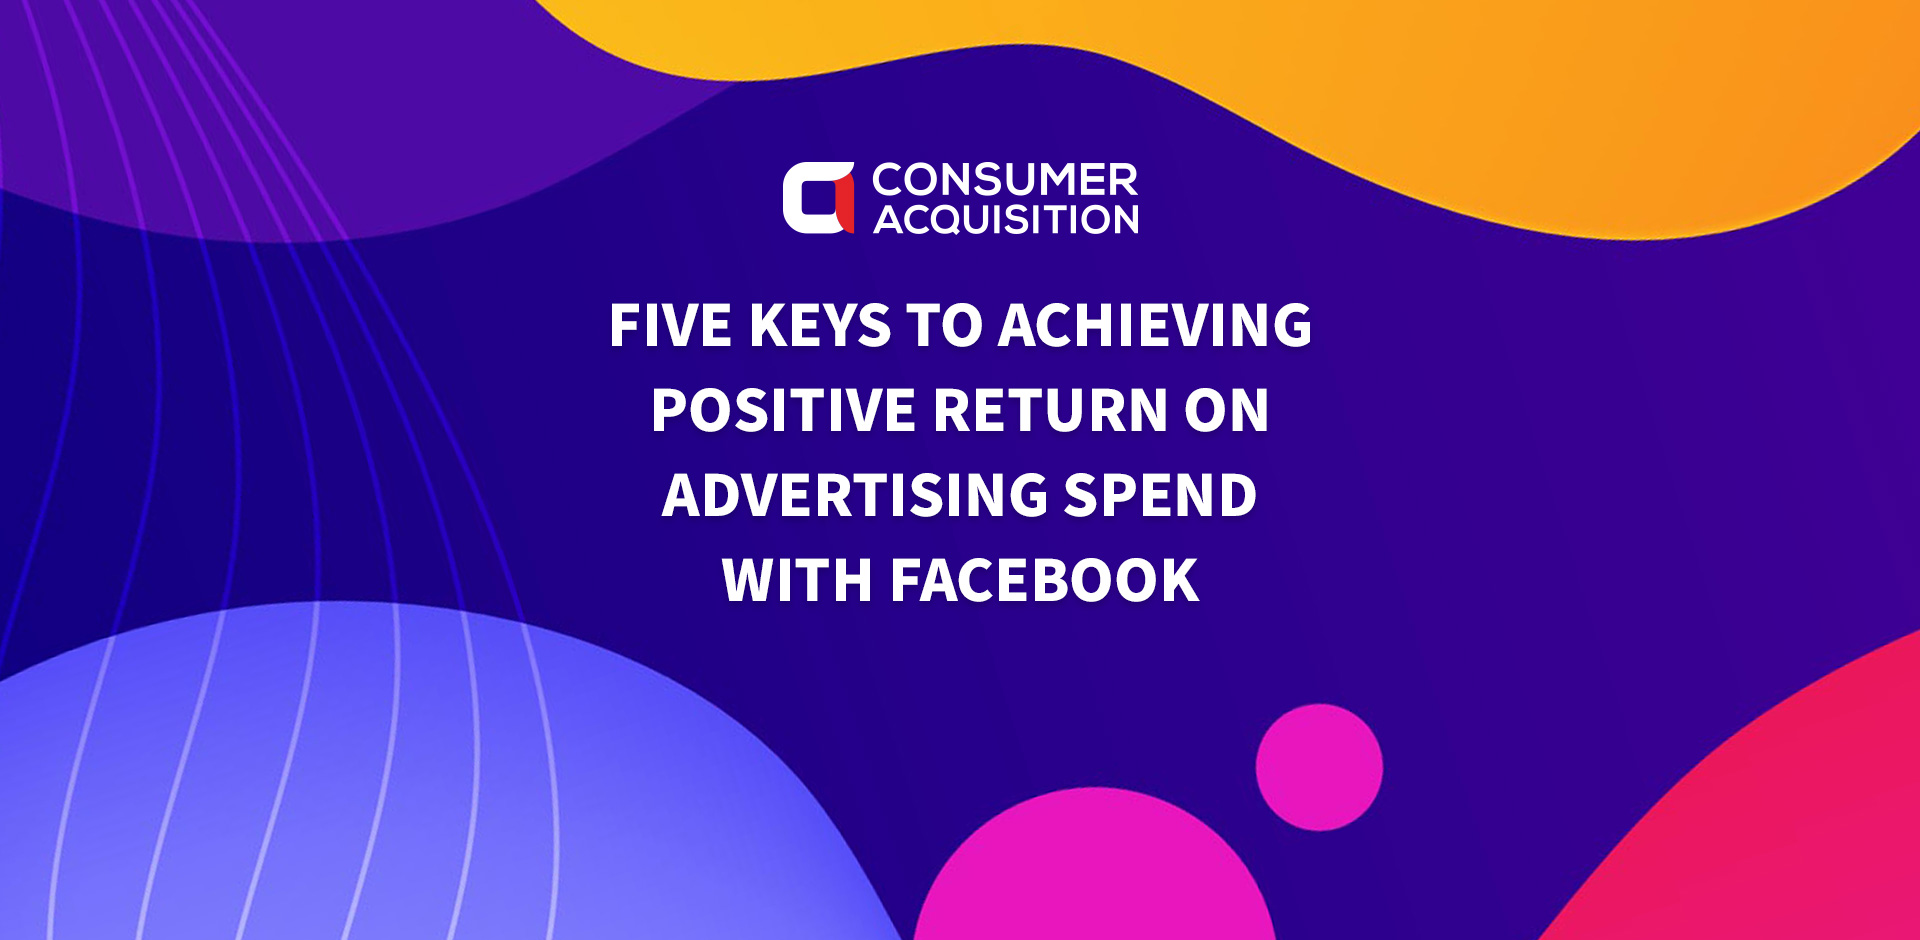 Five Keys To Achieving Positive Return On Advertising Spend With Facebook